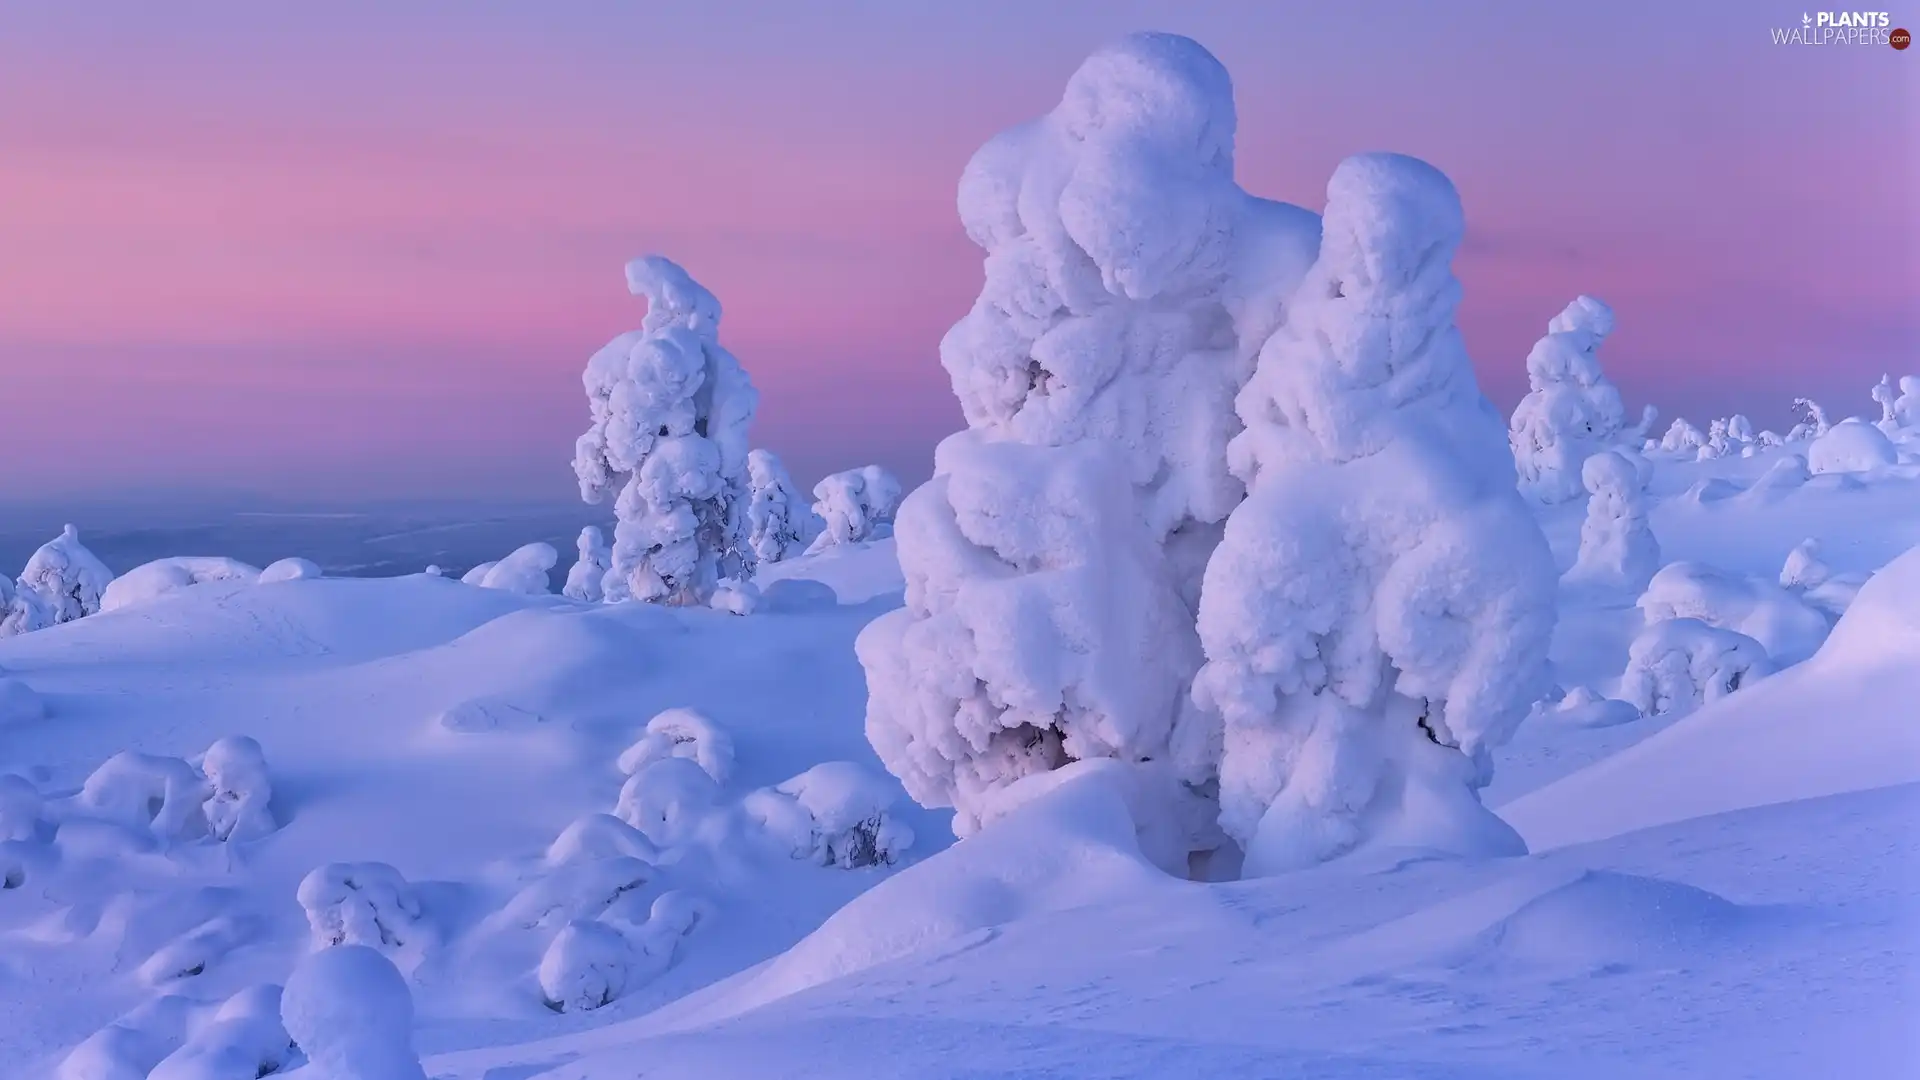 trees, Great Sunsets, drifts, Snowy, winter